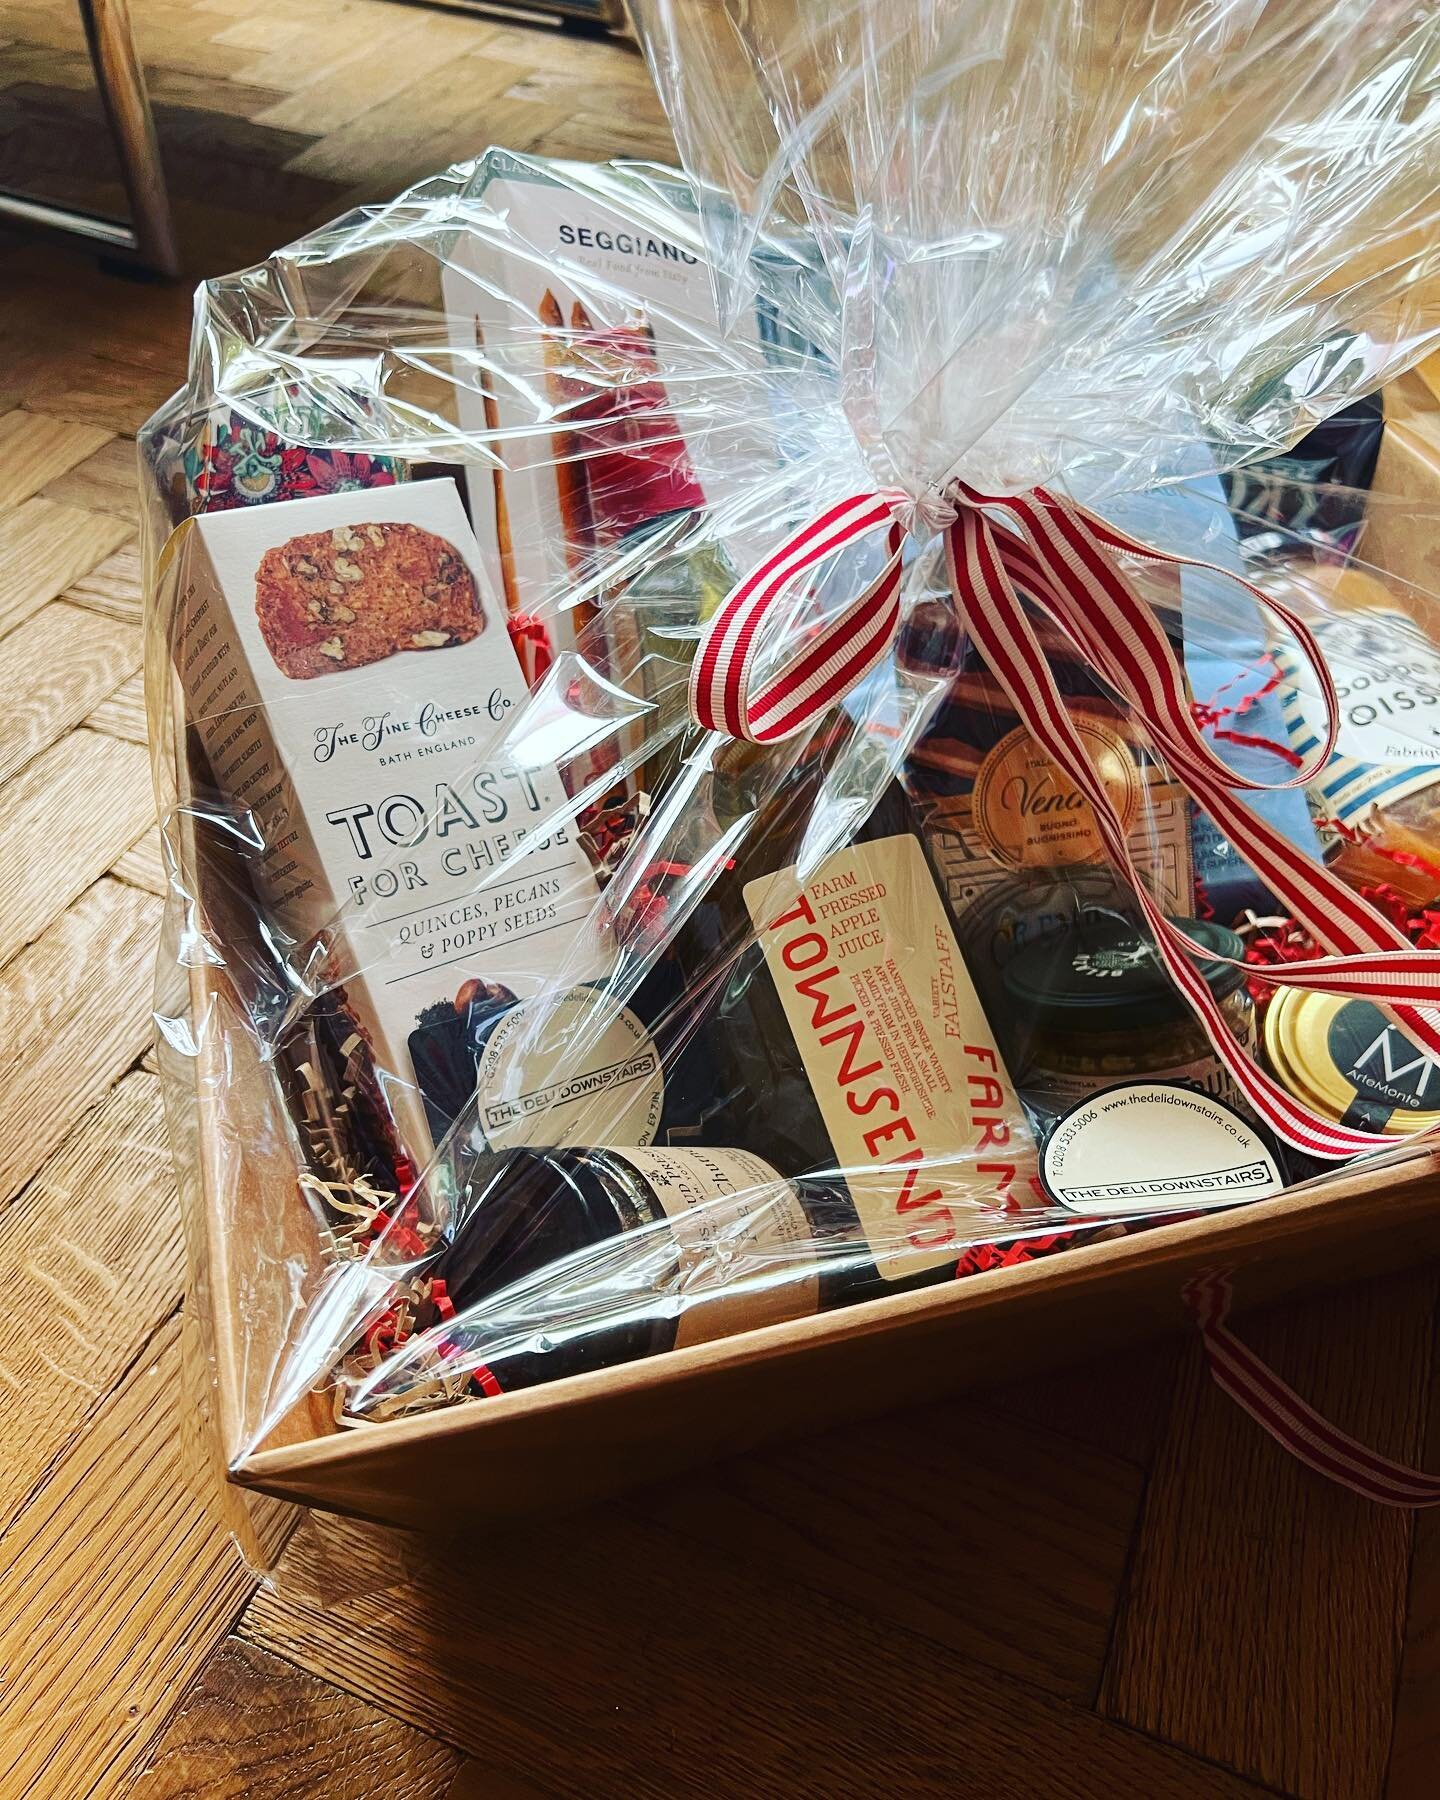 Presenting the aaamazing hamper from @delidownstairs! Just one of an array of brilliant prizes in our raffle and tombola this year from incredibly generous local traders
@wellstreetpizza 
@katesheridanbags @thelauristonpub @hawkepub @allpointseastuk 